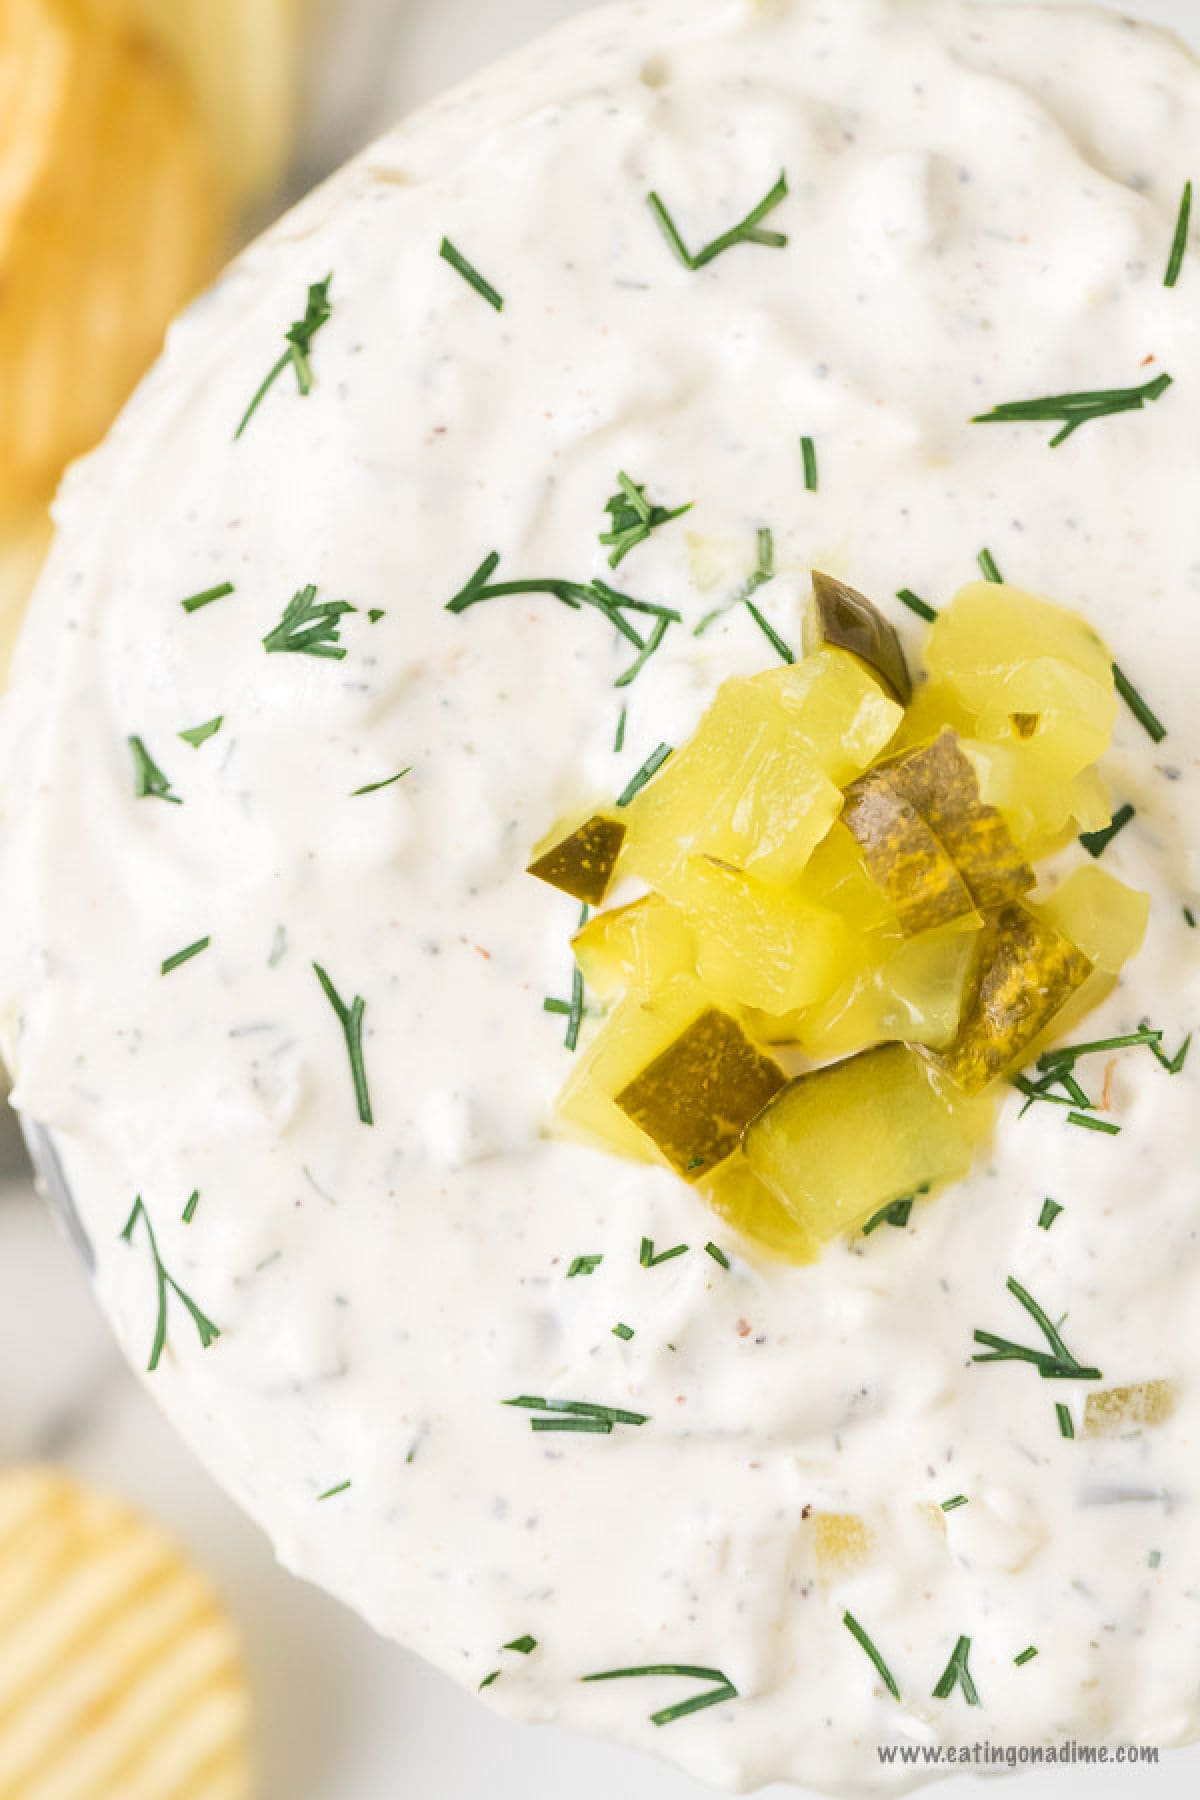 This Dill Pickle Dip Recipe is delicious for dipping vegetables, chips or crackers.  You only need a few ingredients and everyone will love dill pickle dip!